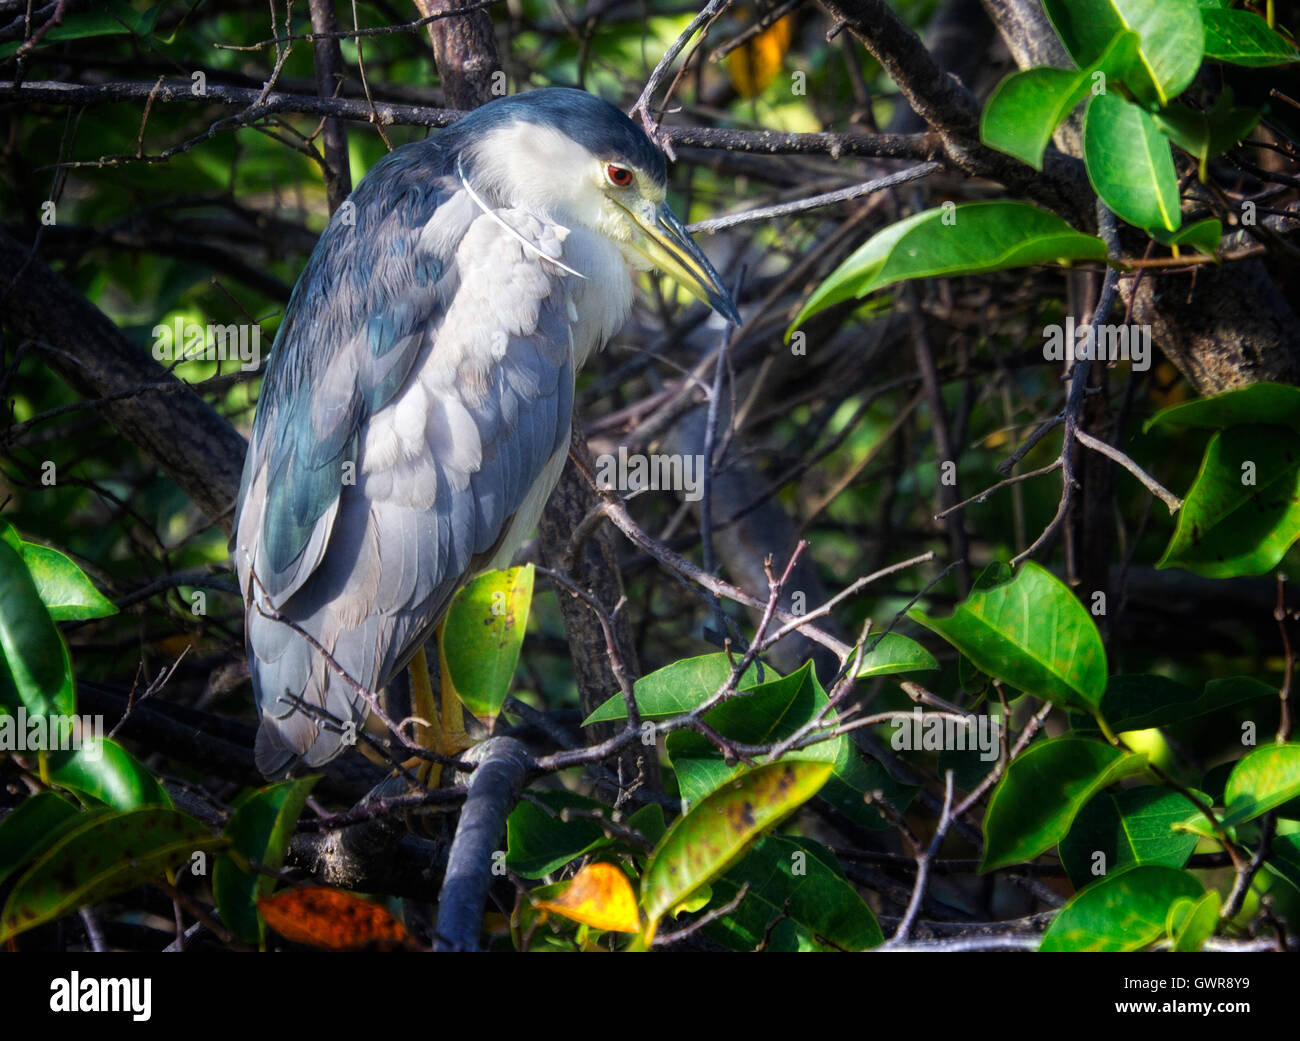 A Black Crowned Night Heron perched in the branches of a pond apple tree appears sleepy in the late afternoon in South Florida. Stock Photo